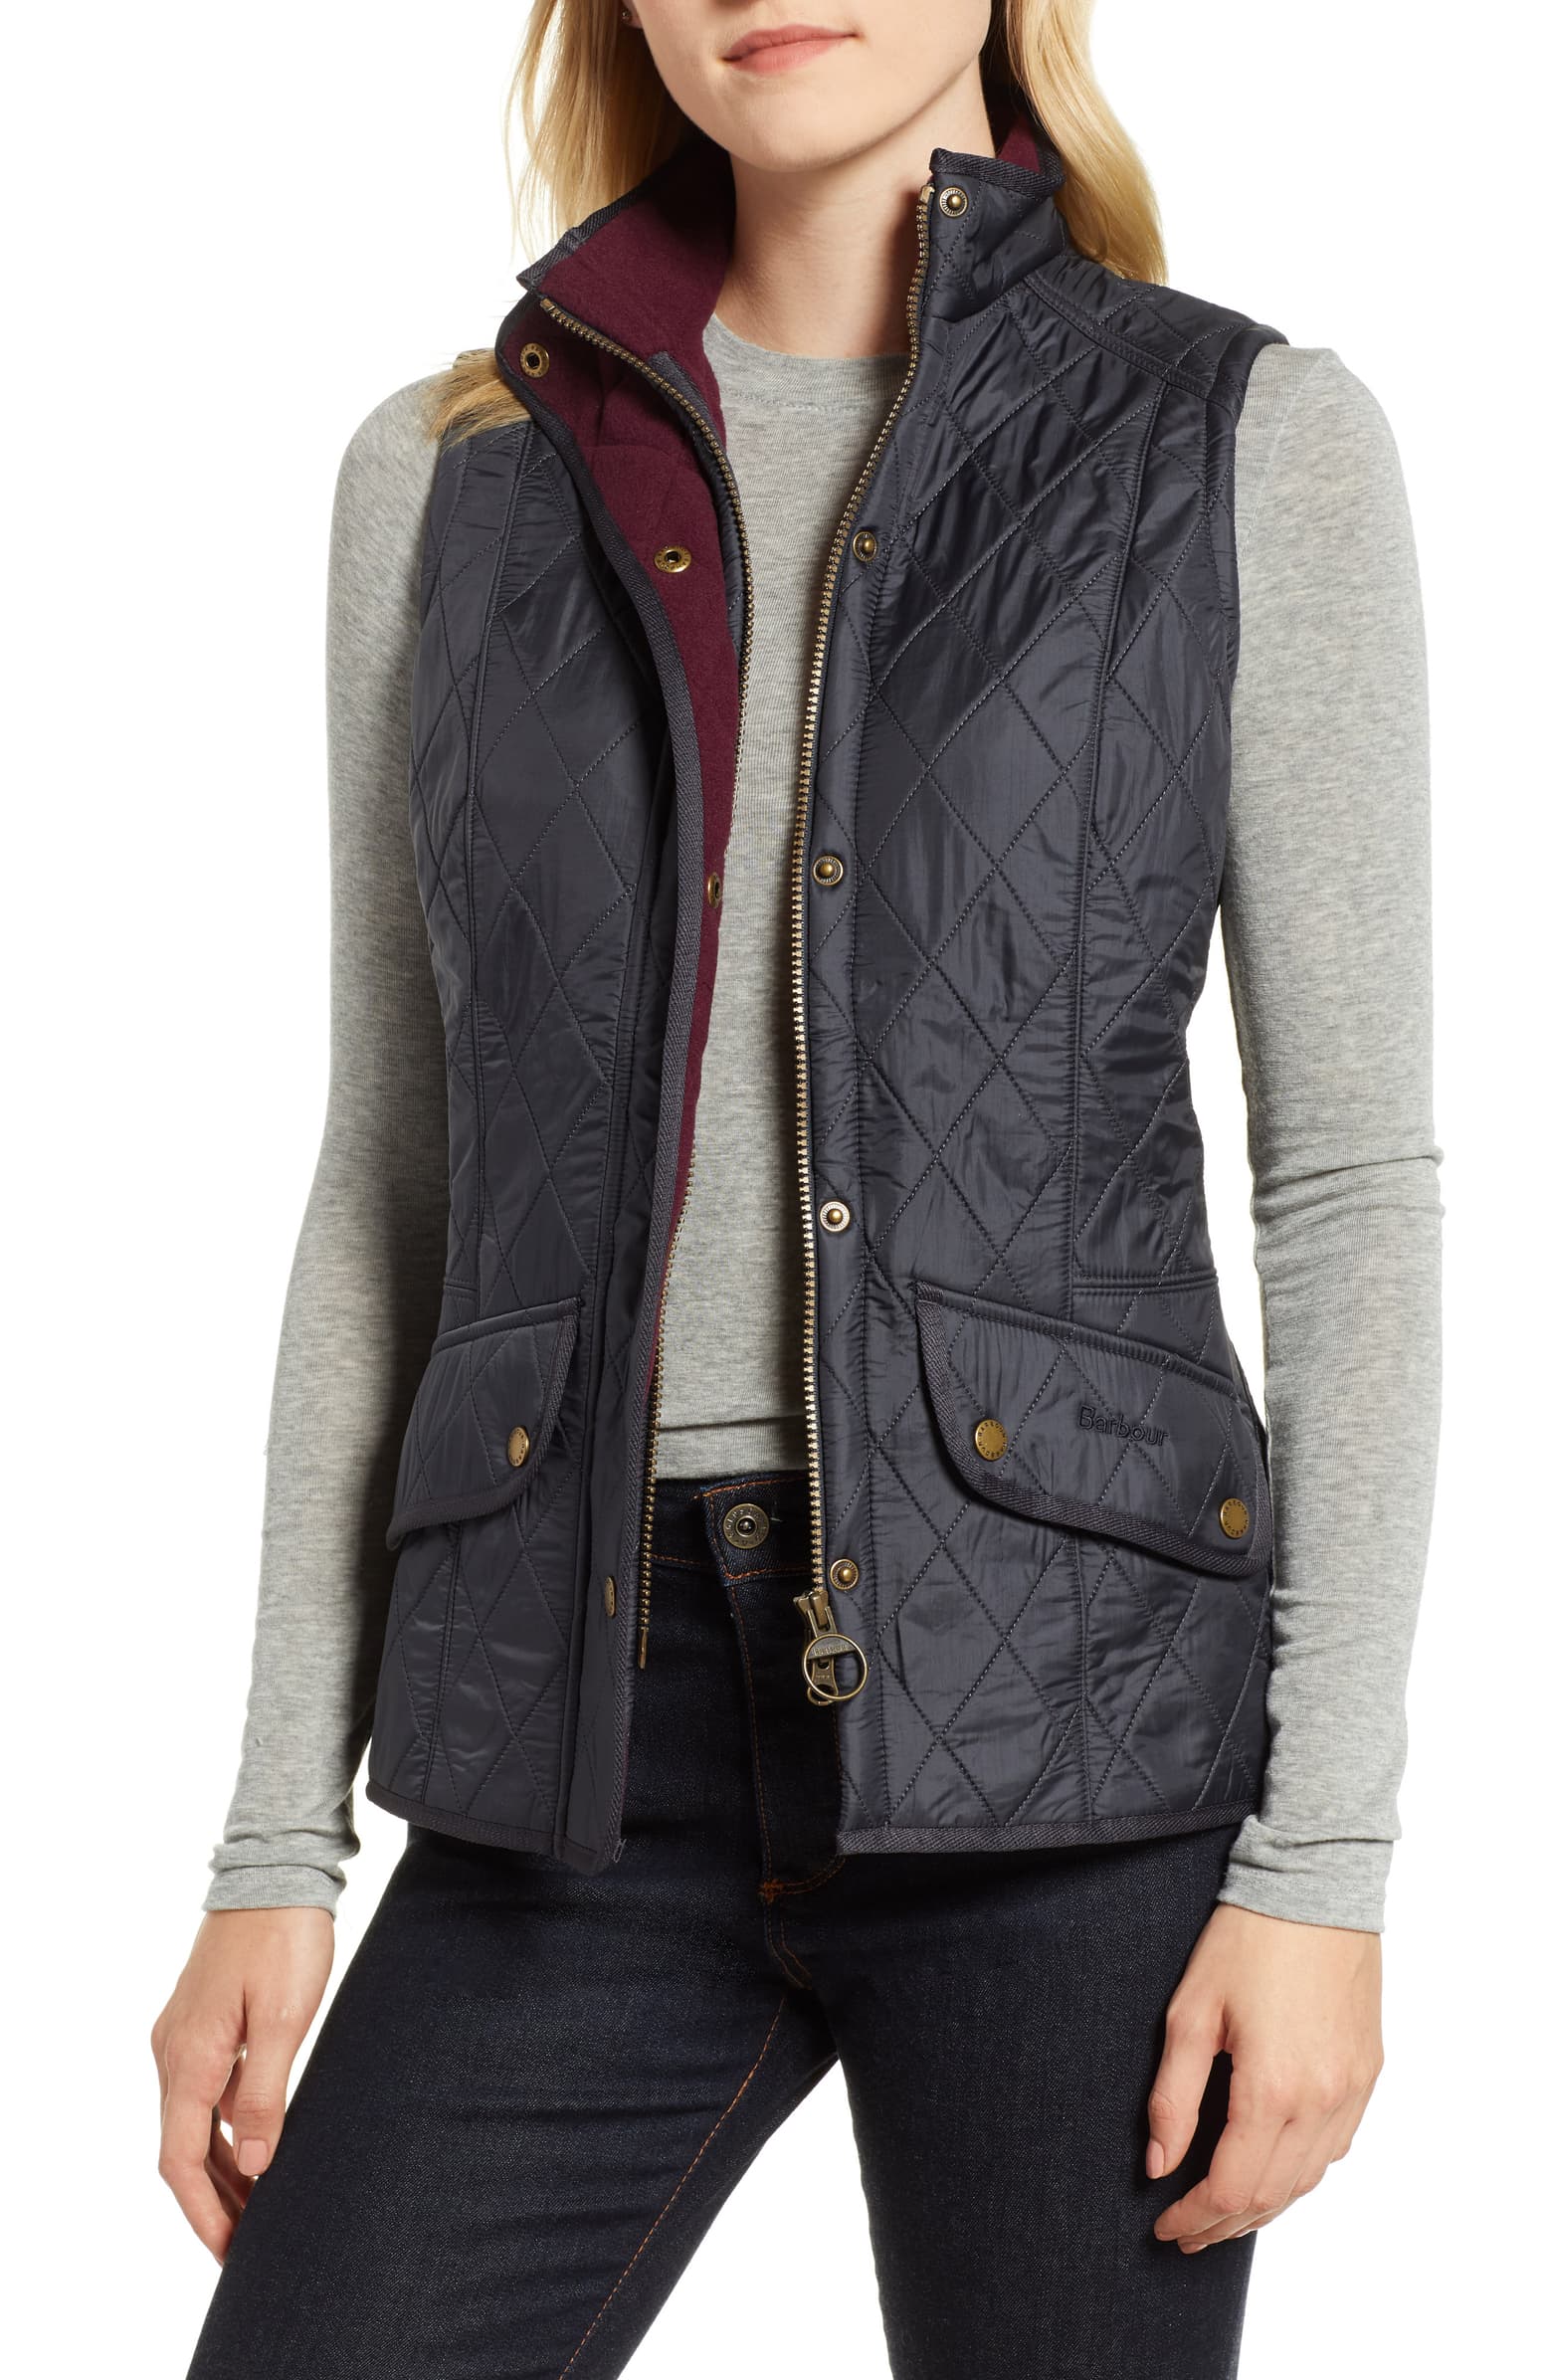 Barbour Jacket + J.Crew Finds | Recent Finds, 10/26 - Kelly in the City